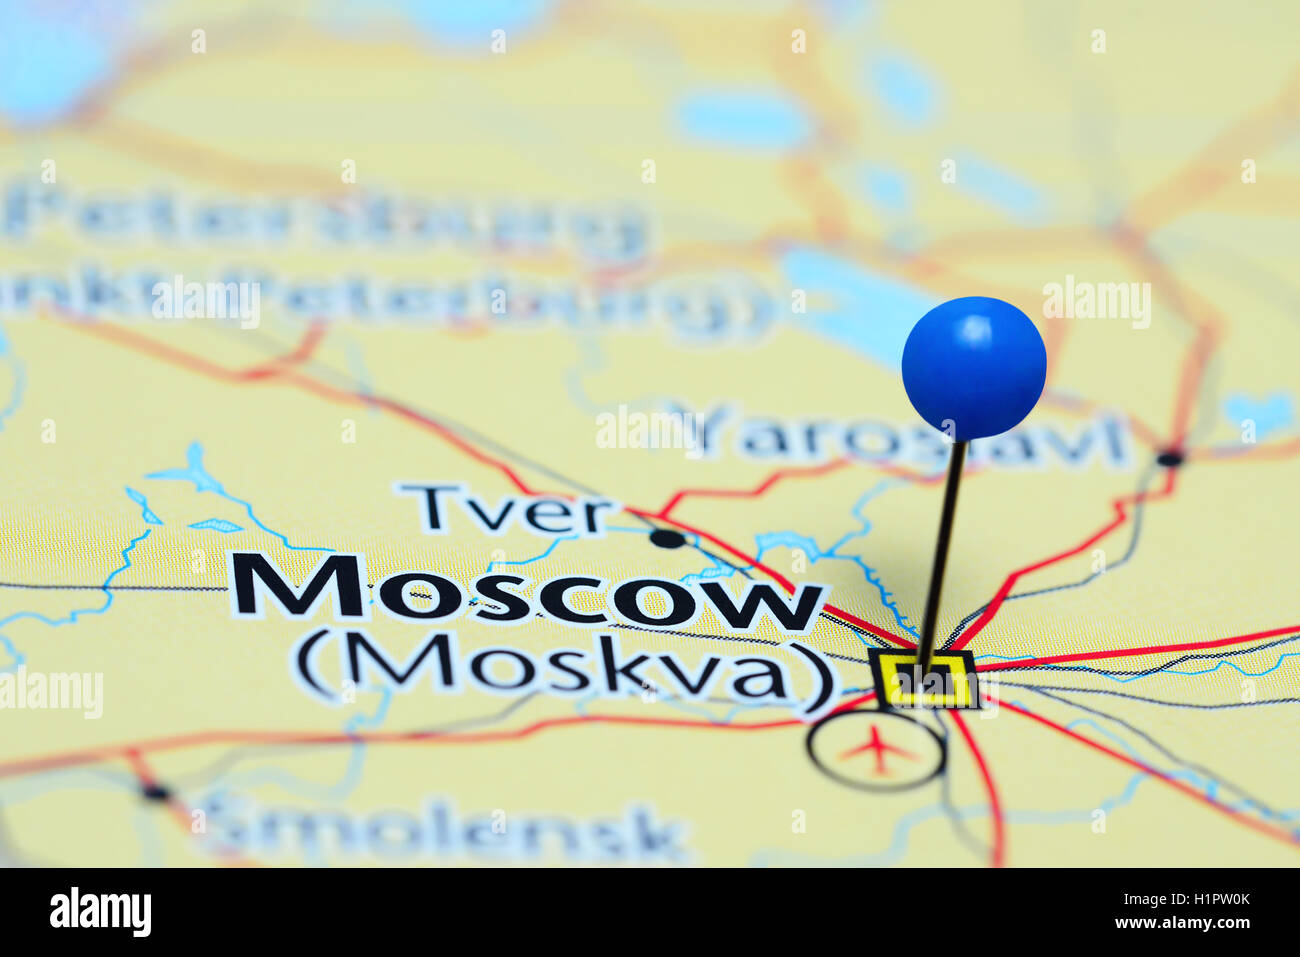 Moscow pinned on a map of Russia Stock Photo